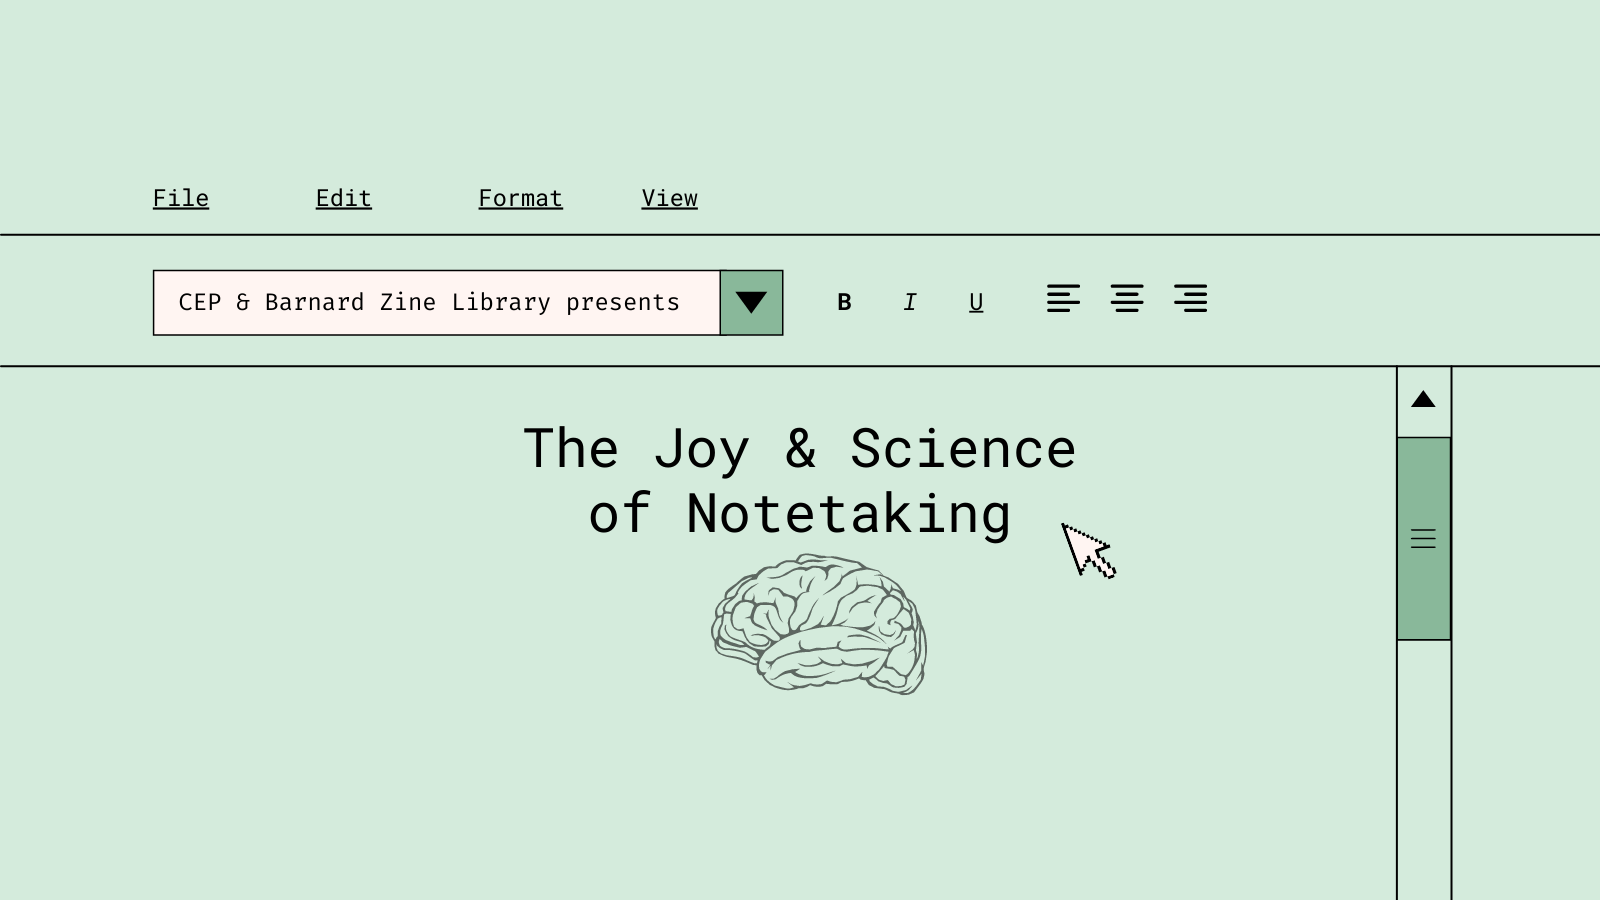 Light green graphic with an image of a brain and electronic note-taking tools